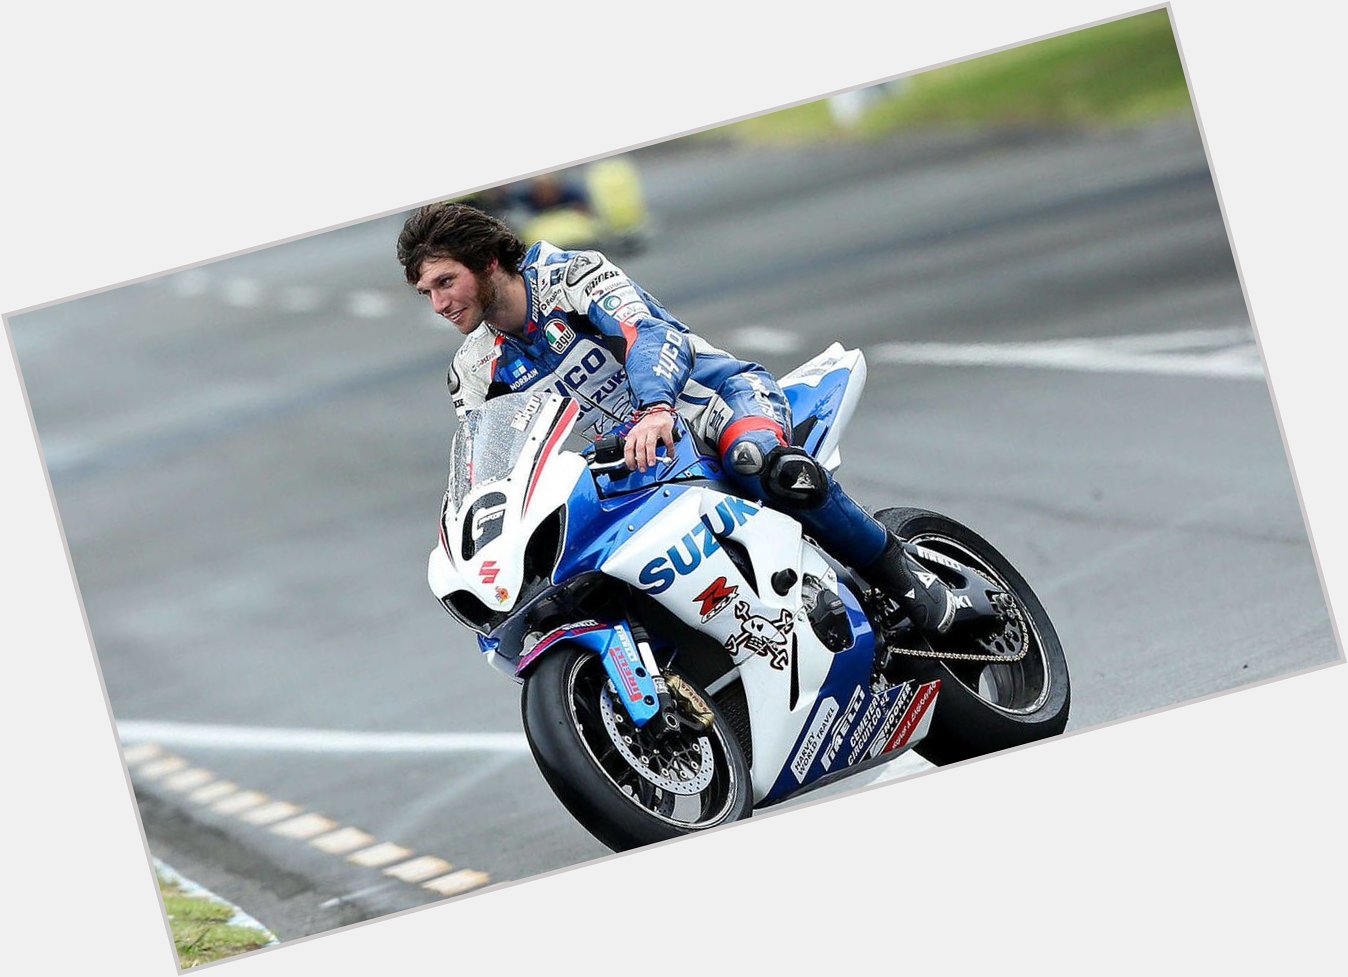 Happy birthday to the legend Guy Martin from everyone at yoke! 